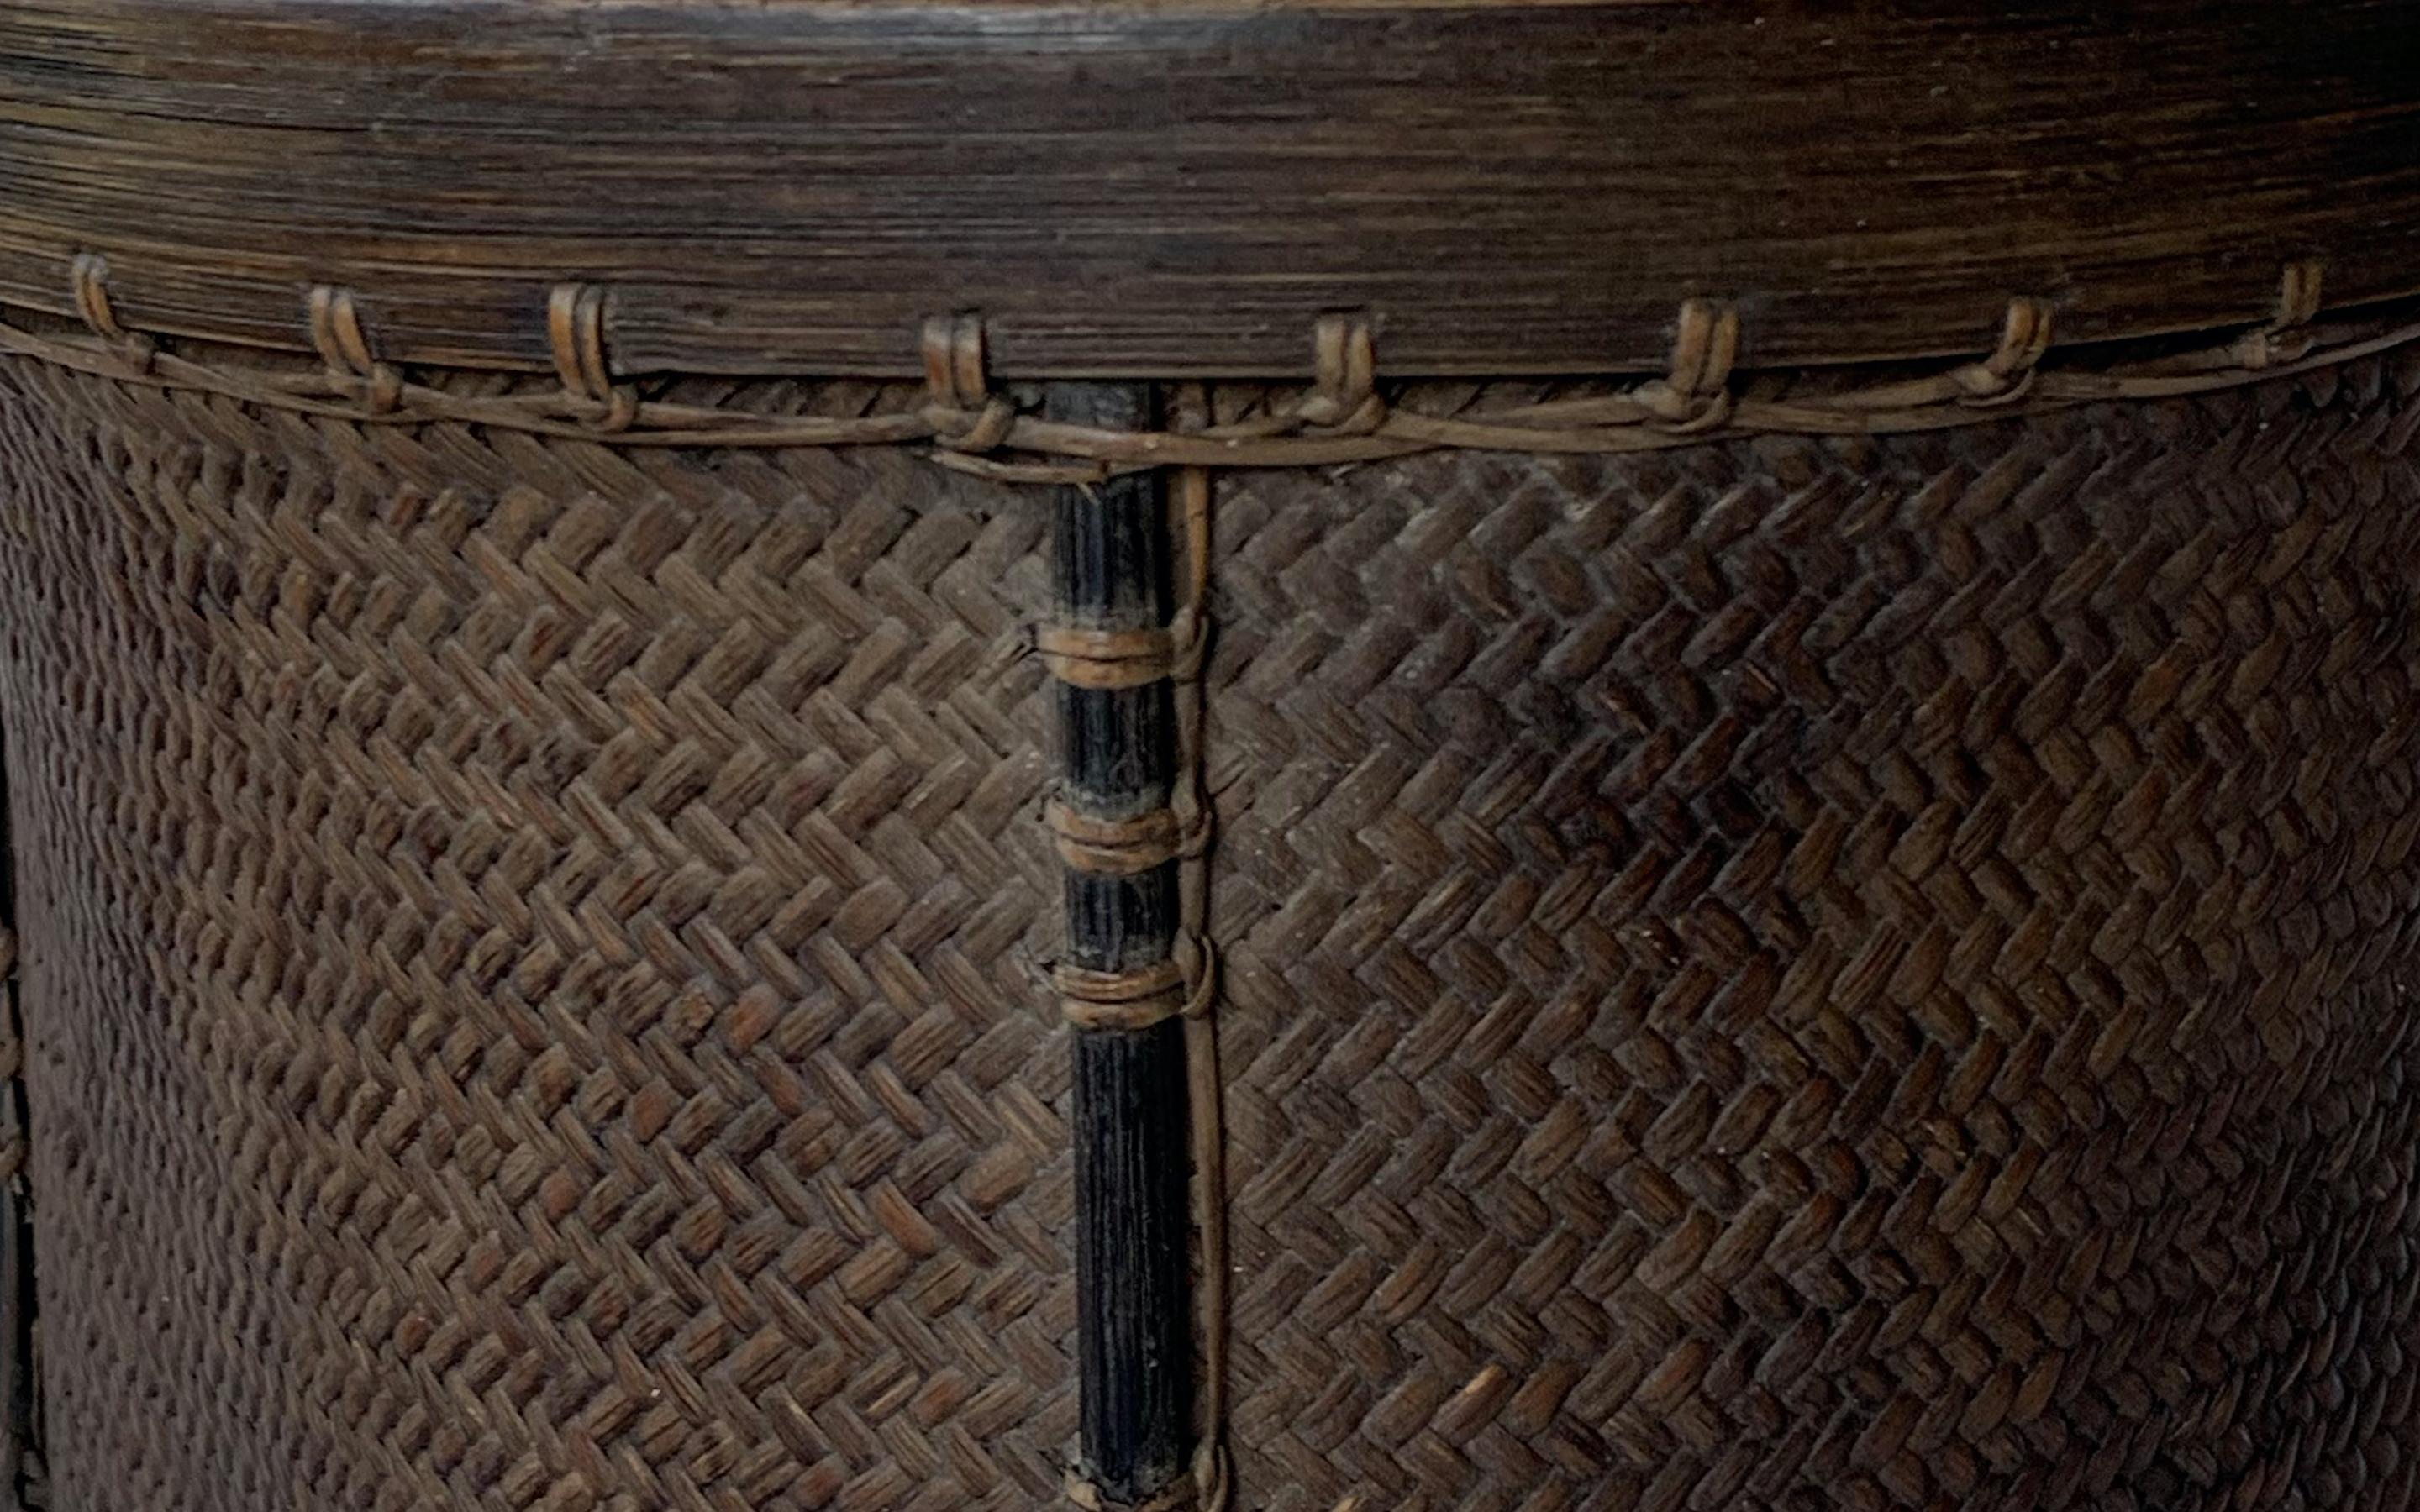 Rattan Basket Dayak Tribe Hand-Woven from Kalimantan, Borneo, Mid 20th Century In Good Condition For Sale In Jimbaran, Bali